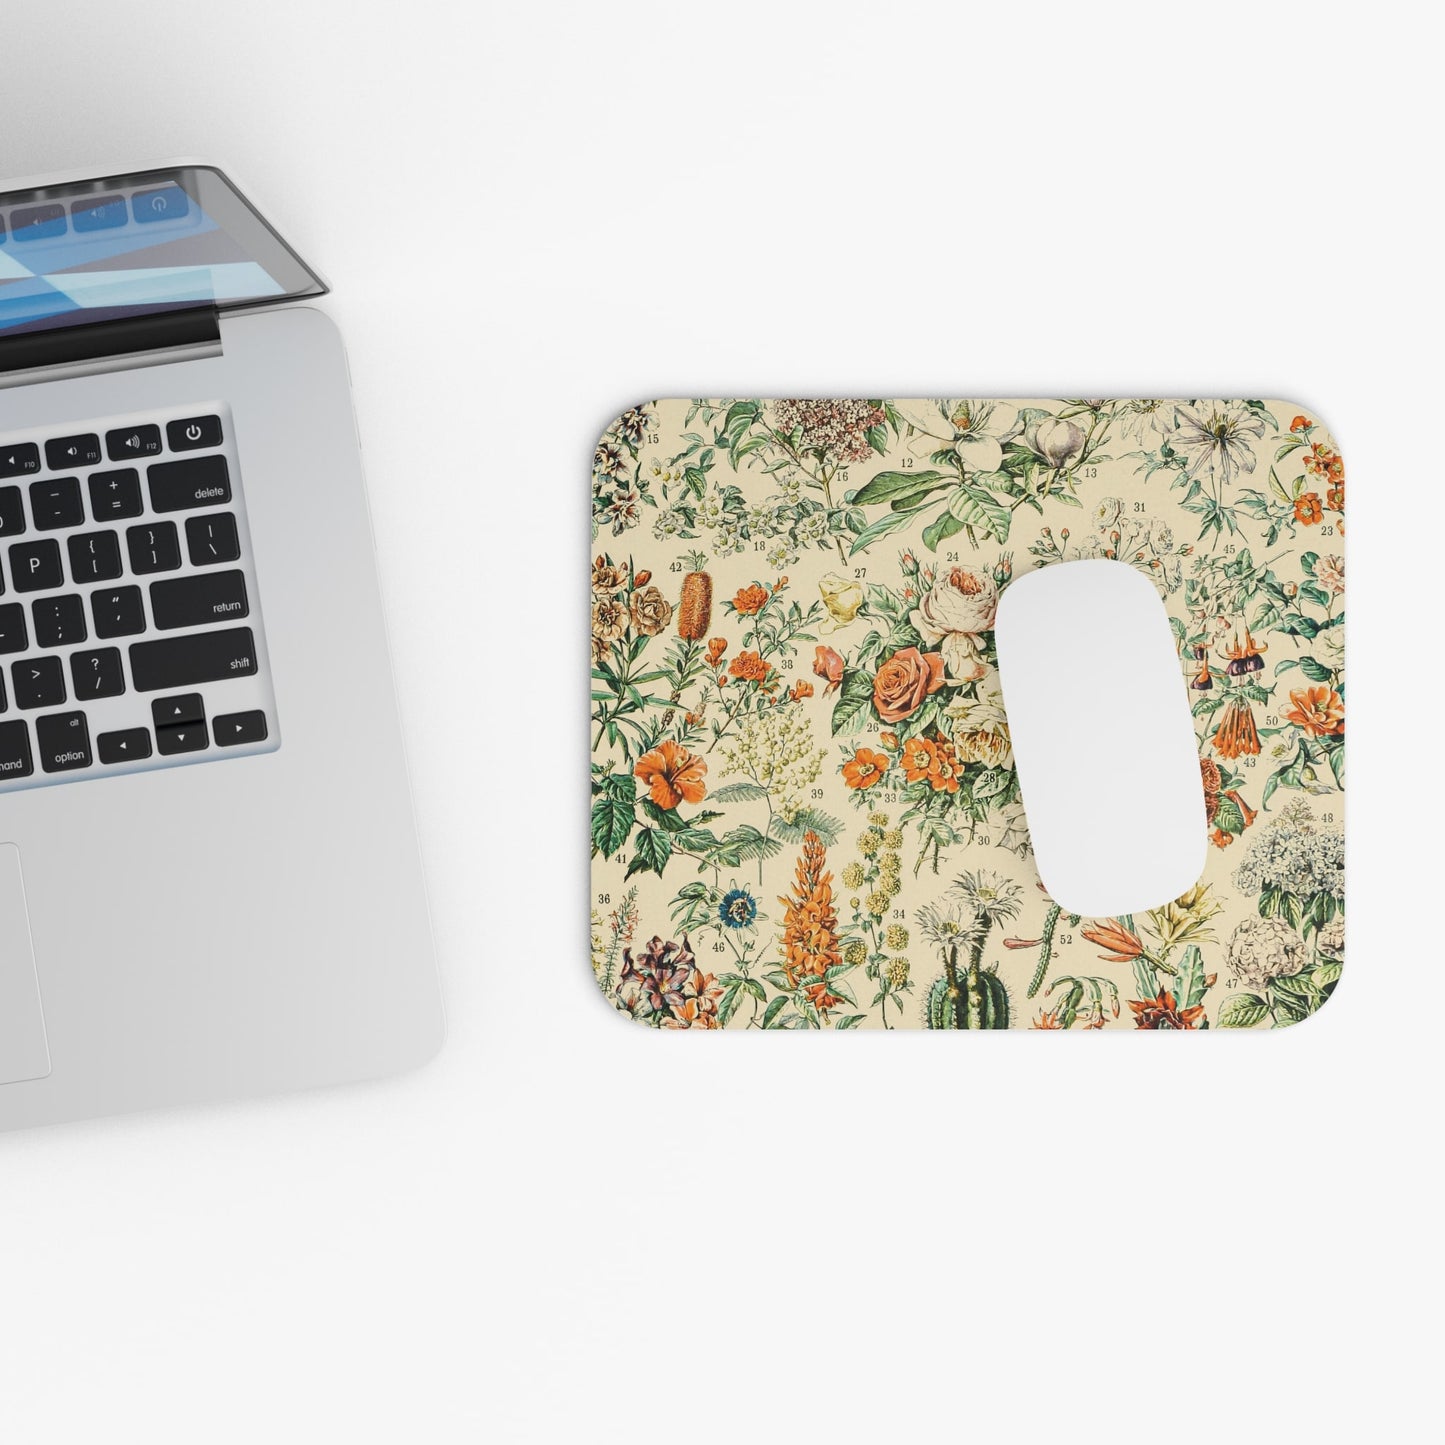 Vintage Flowers and Plants Design Laptop Mouse Pad with White Mouse